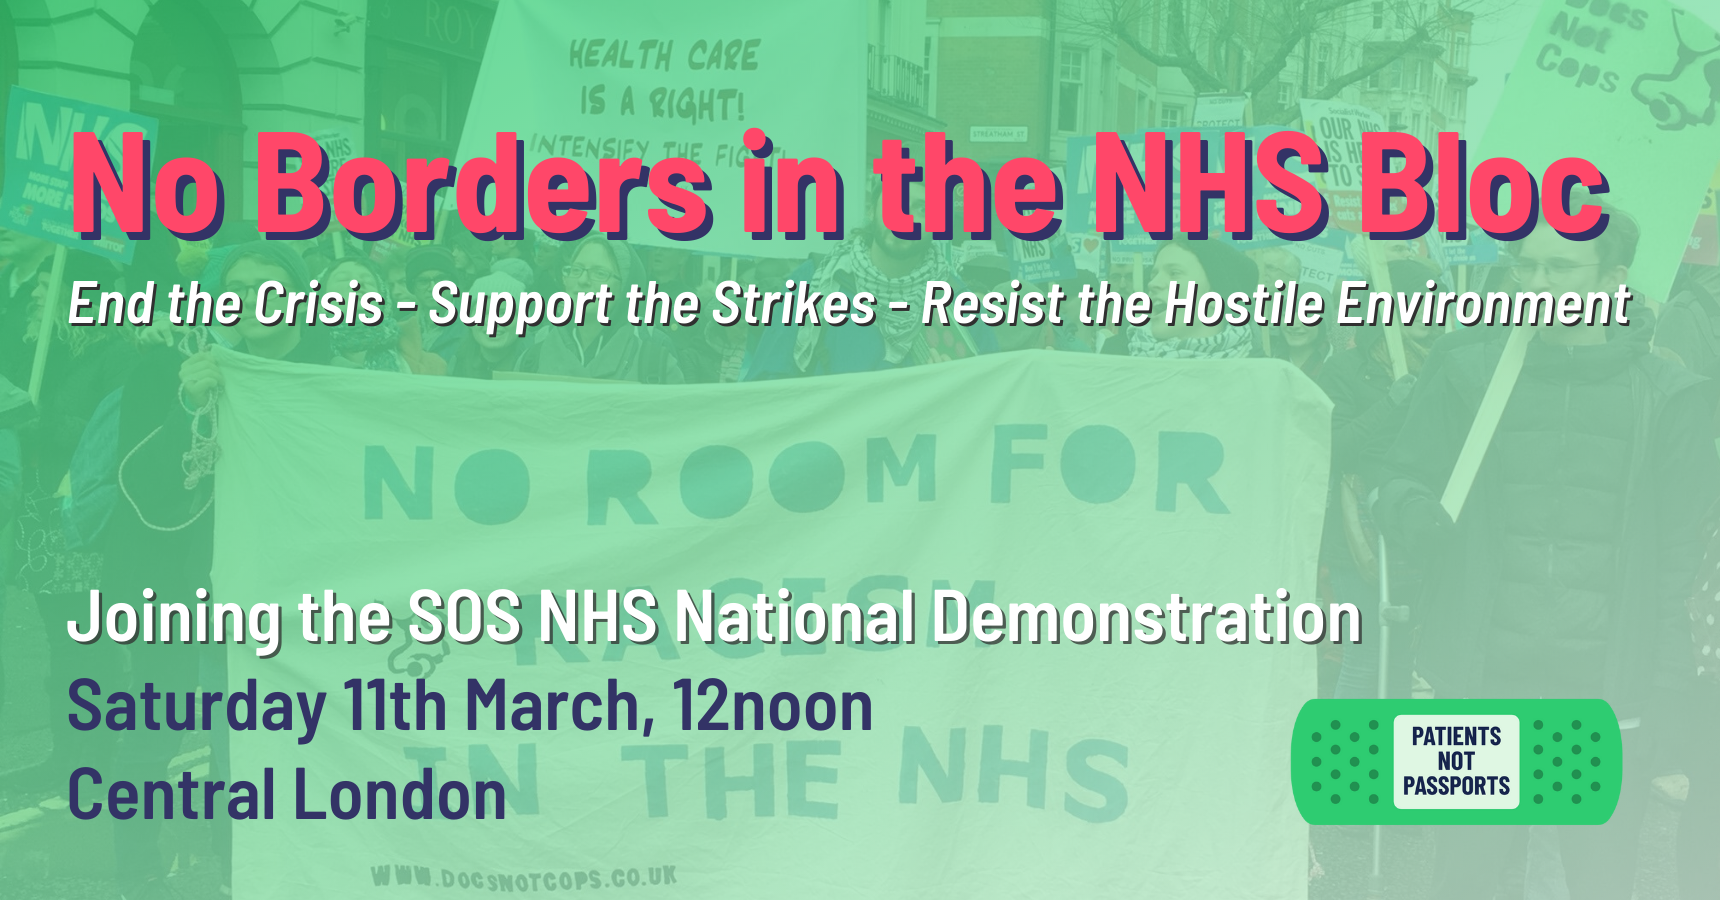 No Borders in the NHS Bloc: End the Crisis - Support the Strikes - Resist the Hostile Environment. Joining the SOS NHS National Demonstration. Saturday 11th March, 12noon. Central London